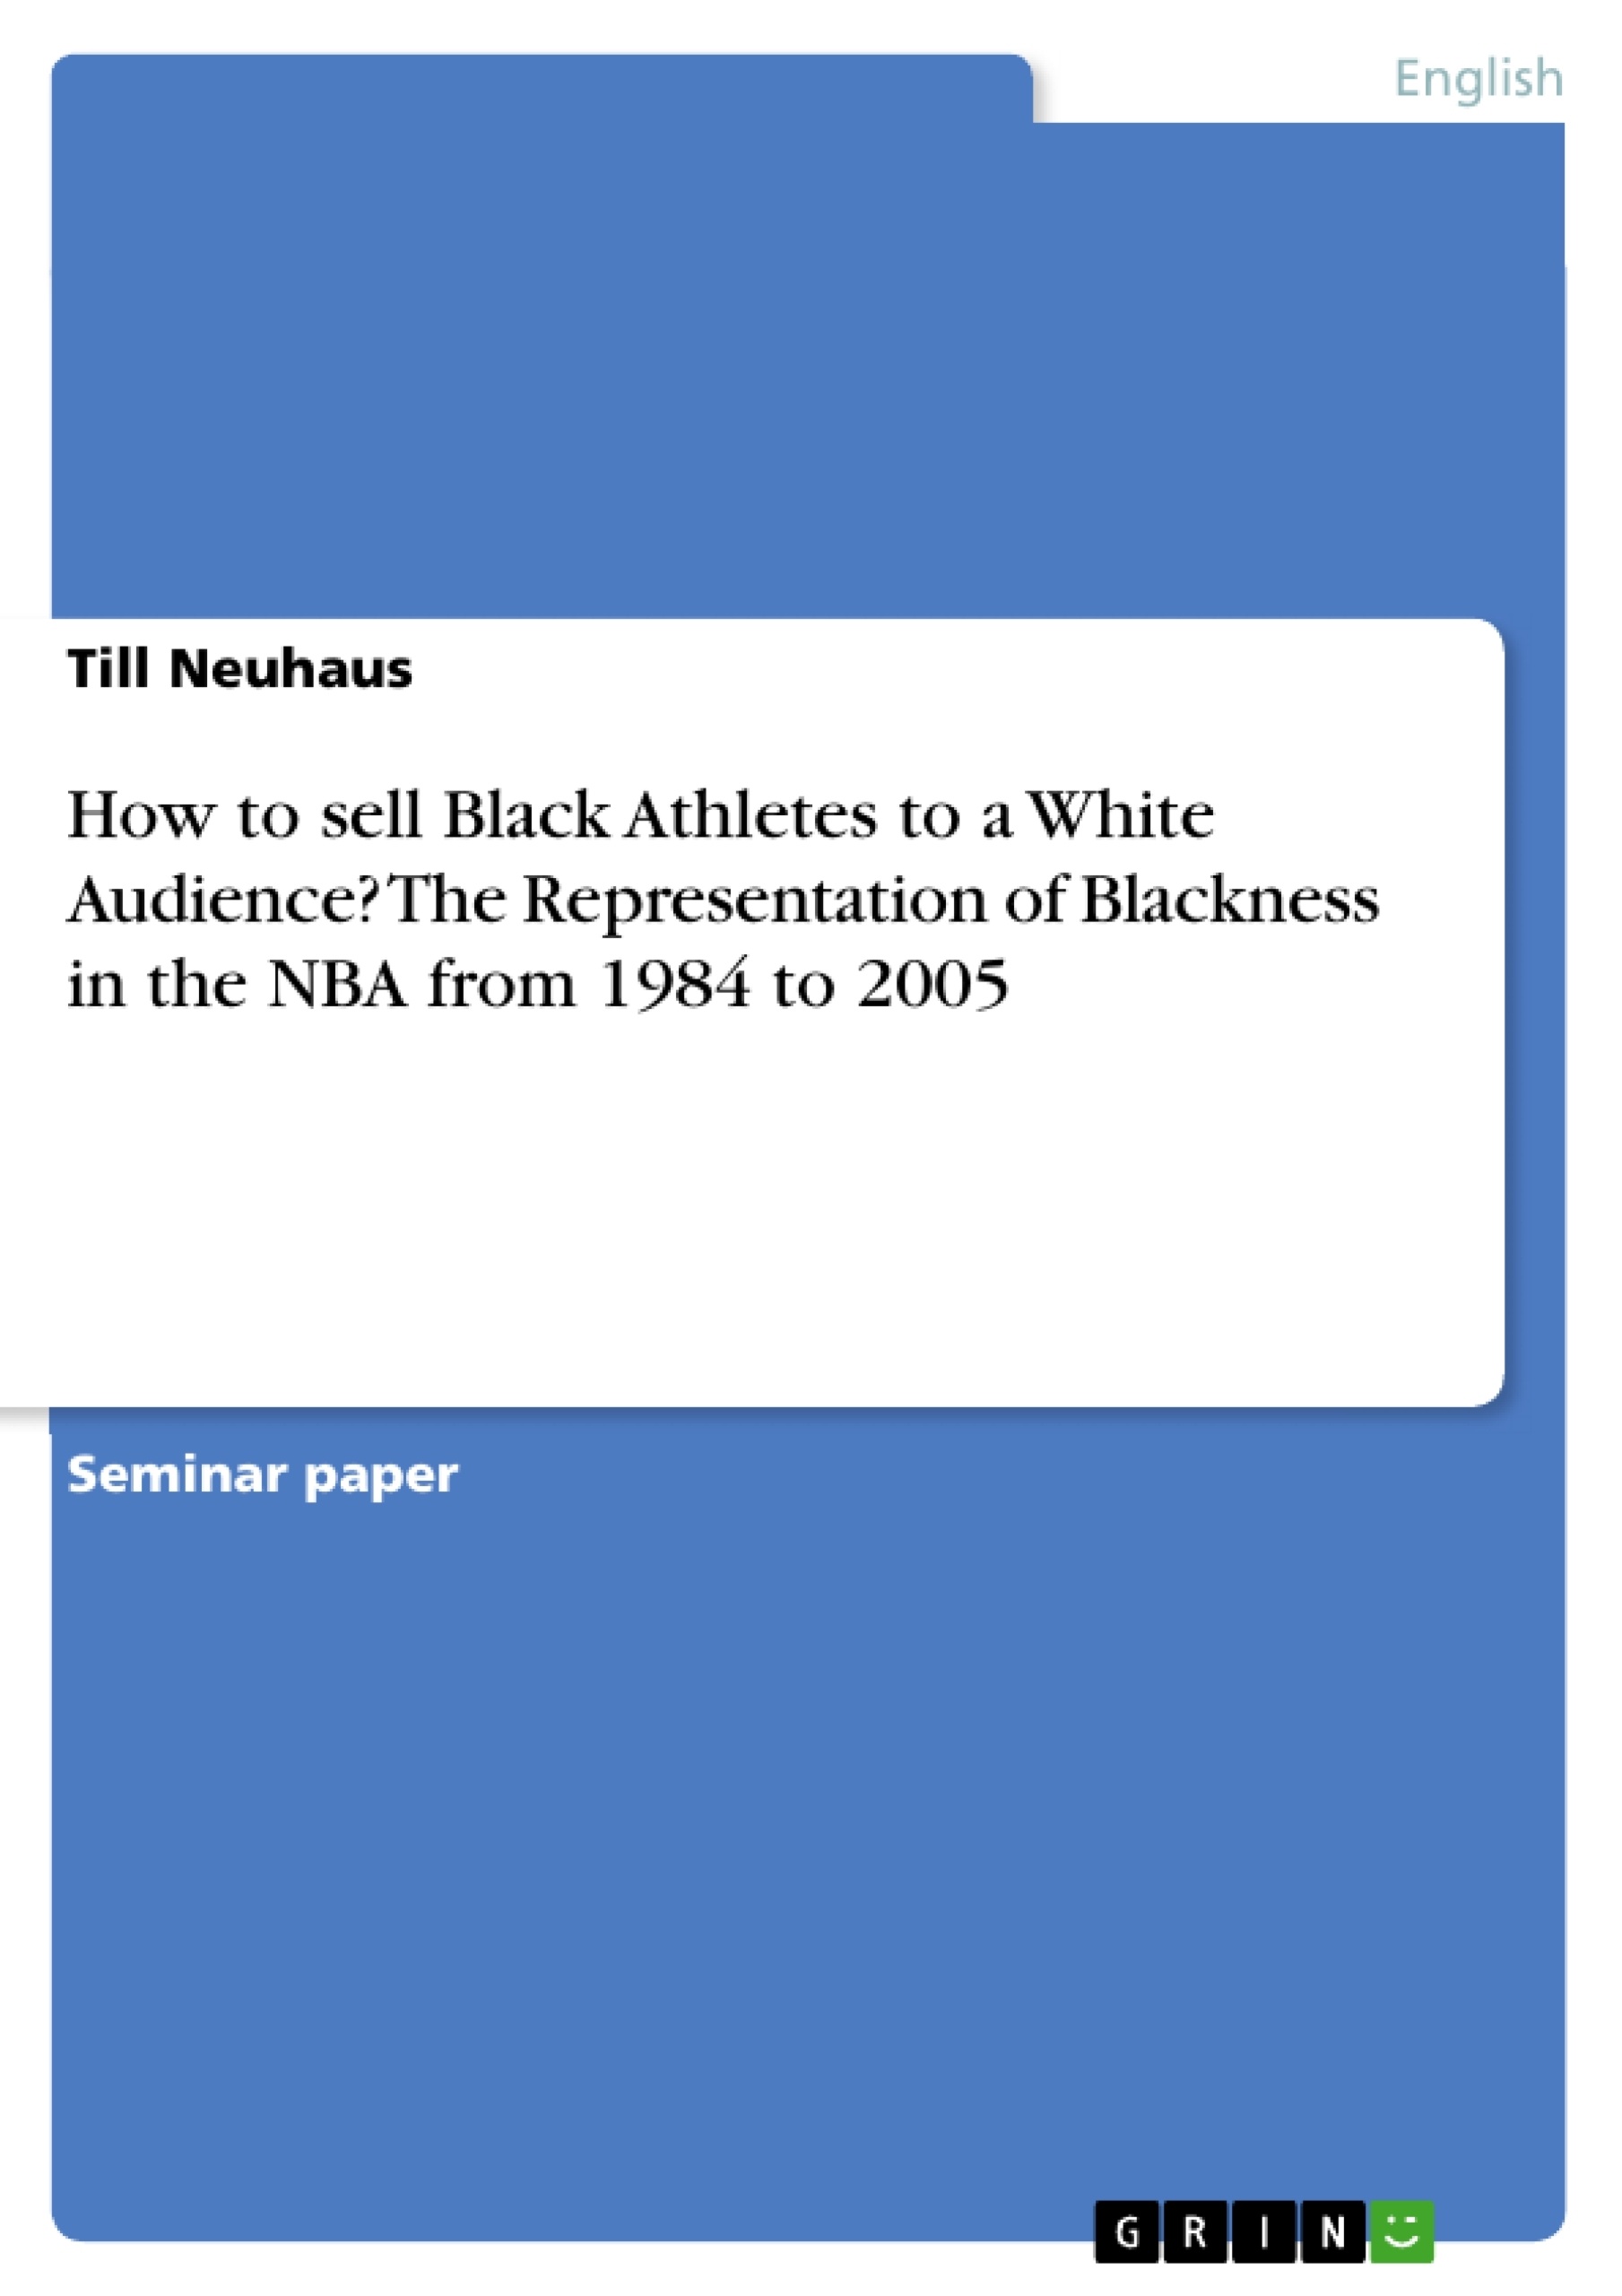 Titre: How to sell Black Athletes to a White Audience? The Representation of Blackness in the NBA from 1984 to 2005